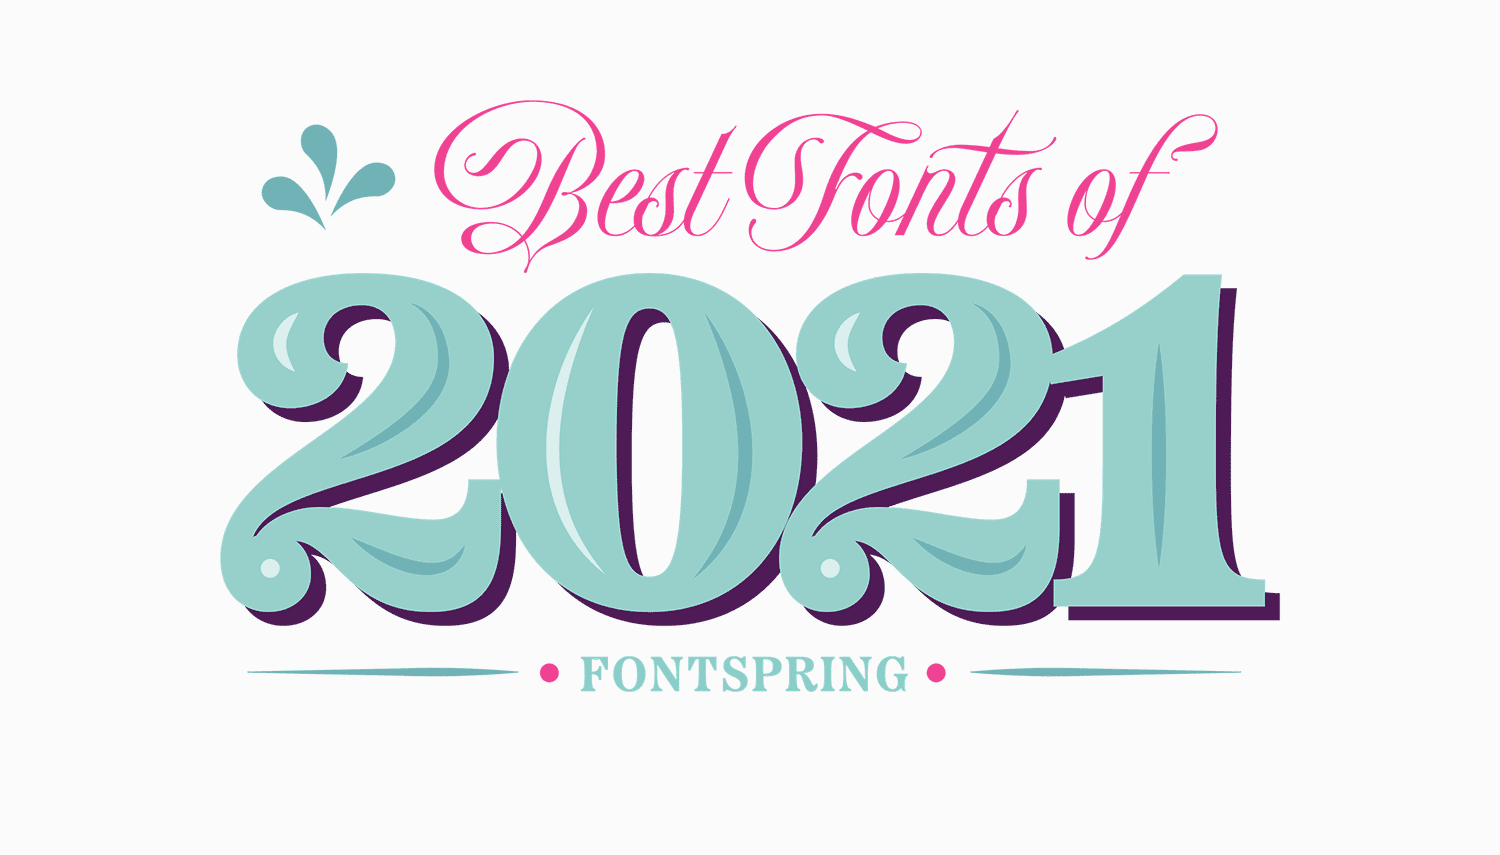 More information about "Best Fonts of 2021 at Fontspring"